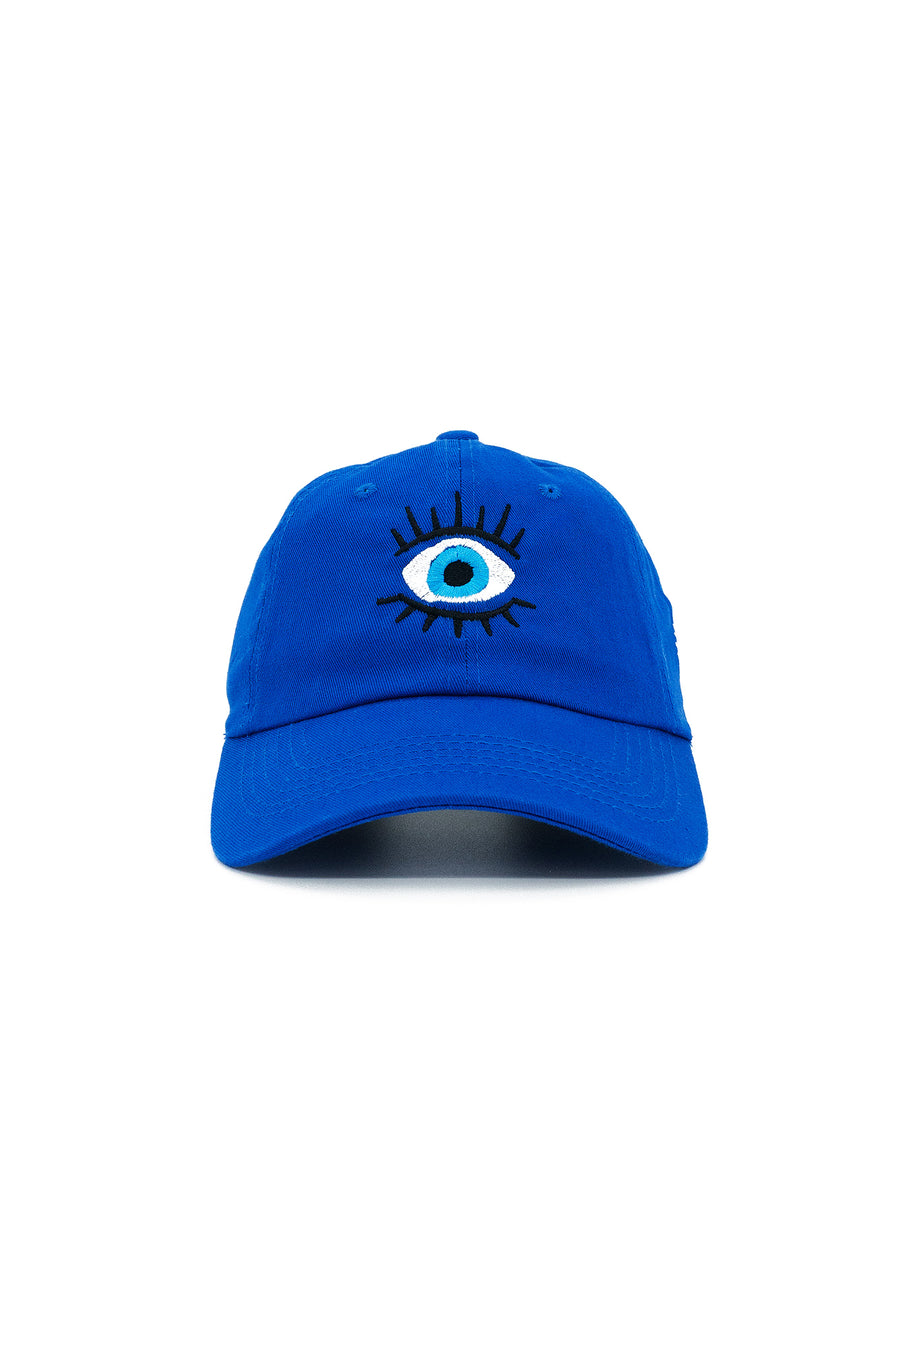 Evil Eye Hat, Protective Embroidered Cap, Unisex Fashion Hat, Spiritual Defense Accessory, Good Luck Charm Cap, Unique Gift Idea, Adjustable Black Hat, Quality Embroidery Design, Mystical Warding Accessory, Durable Fashion Hat